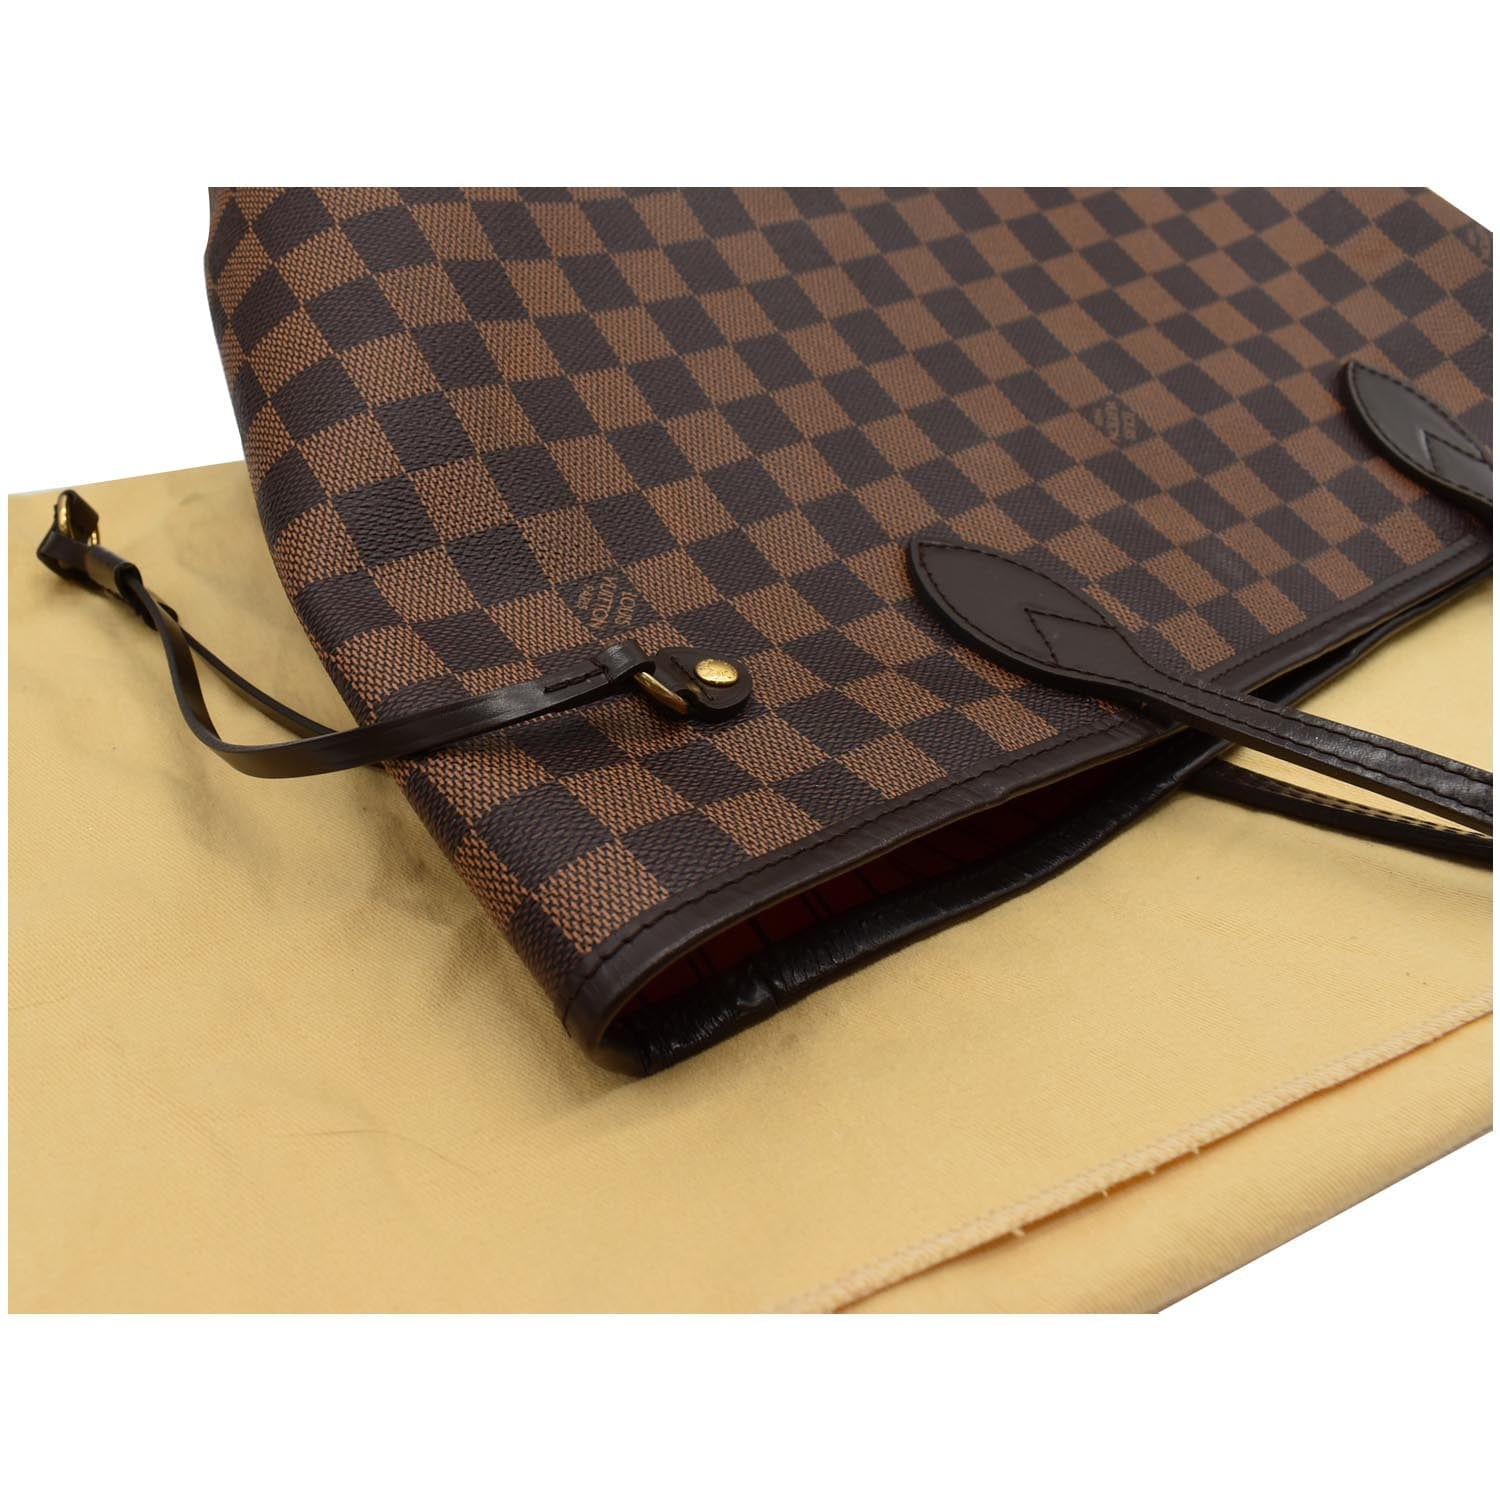 Pre-Owned Louis Vuitton Neverfull Damier Ebene MM Tote Bag